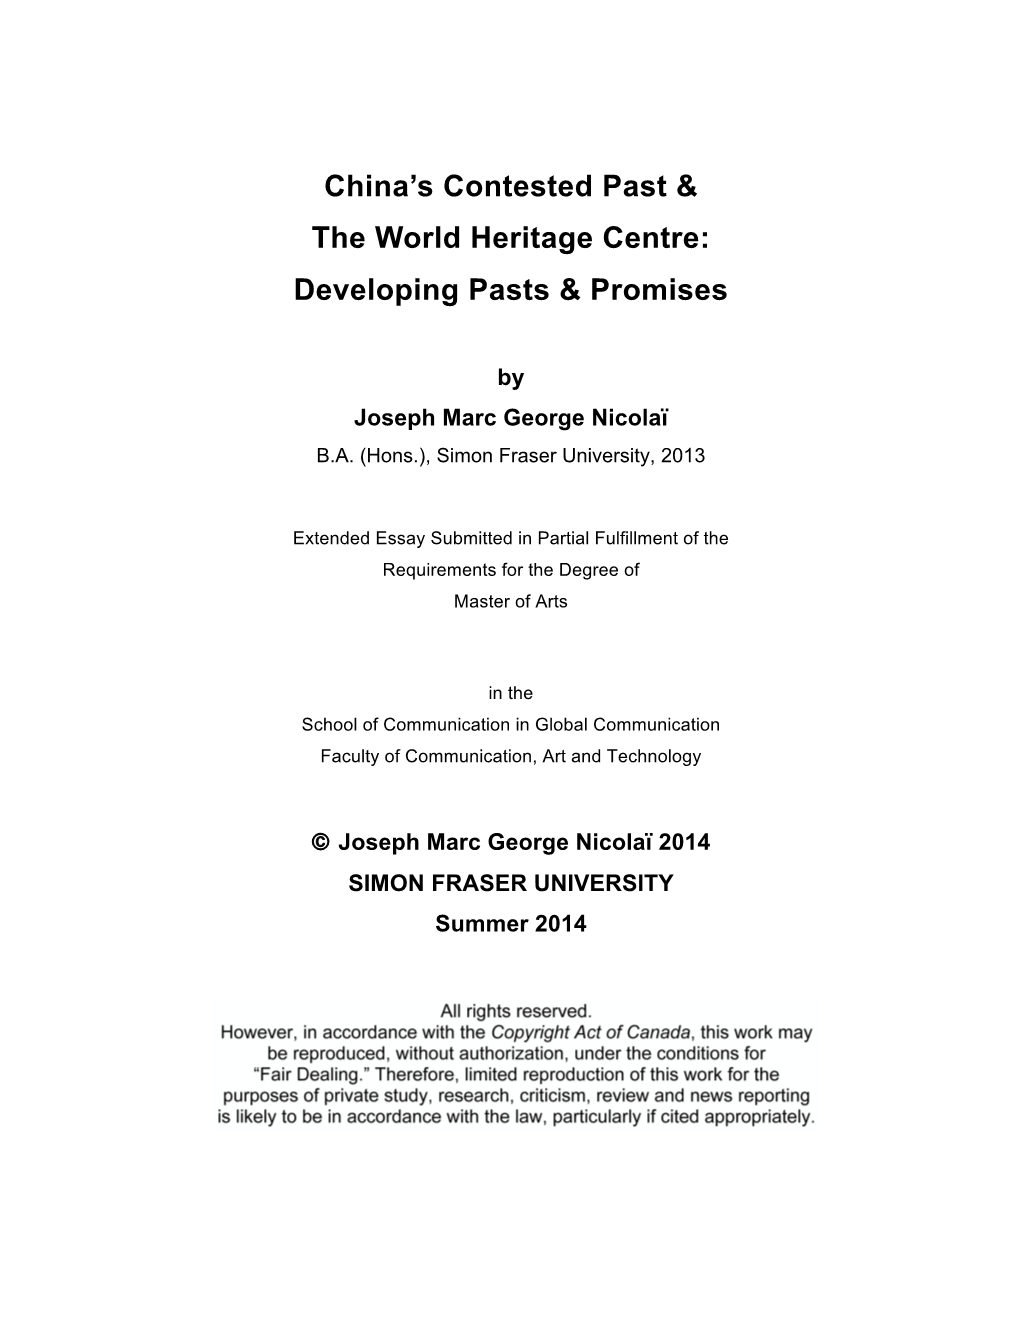 China's Contested Past & the World Heritage Centre